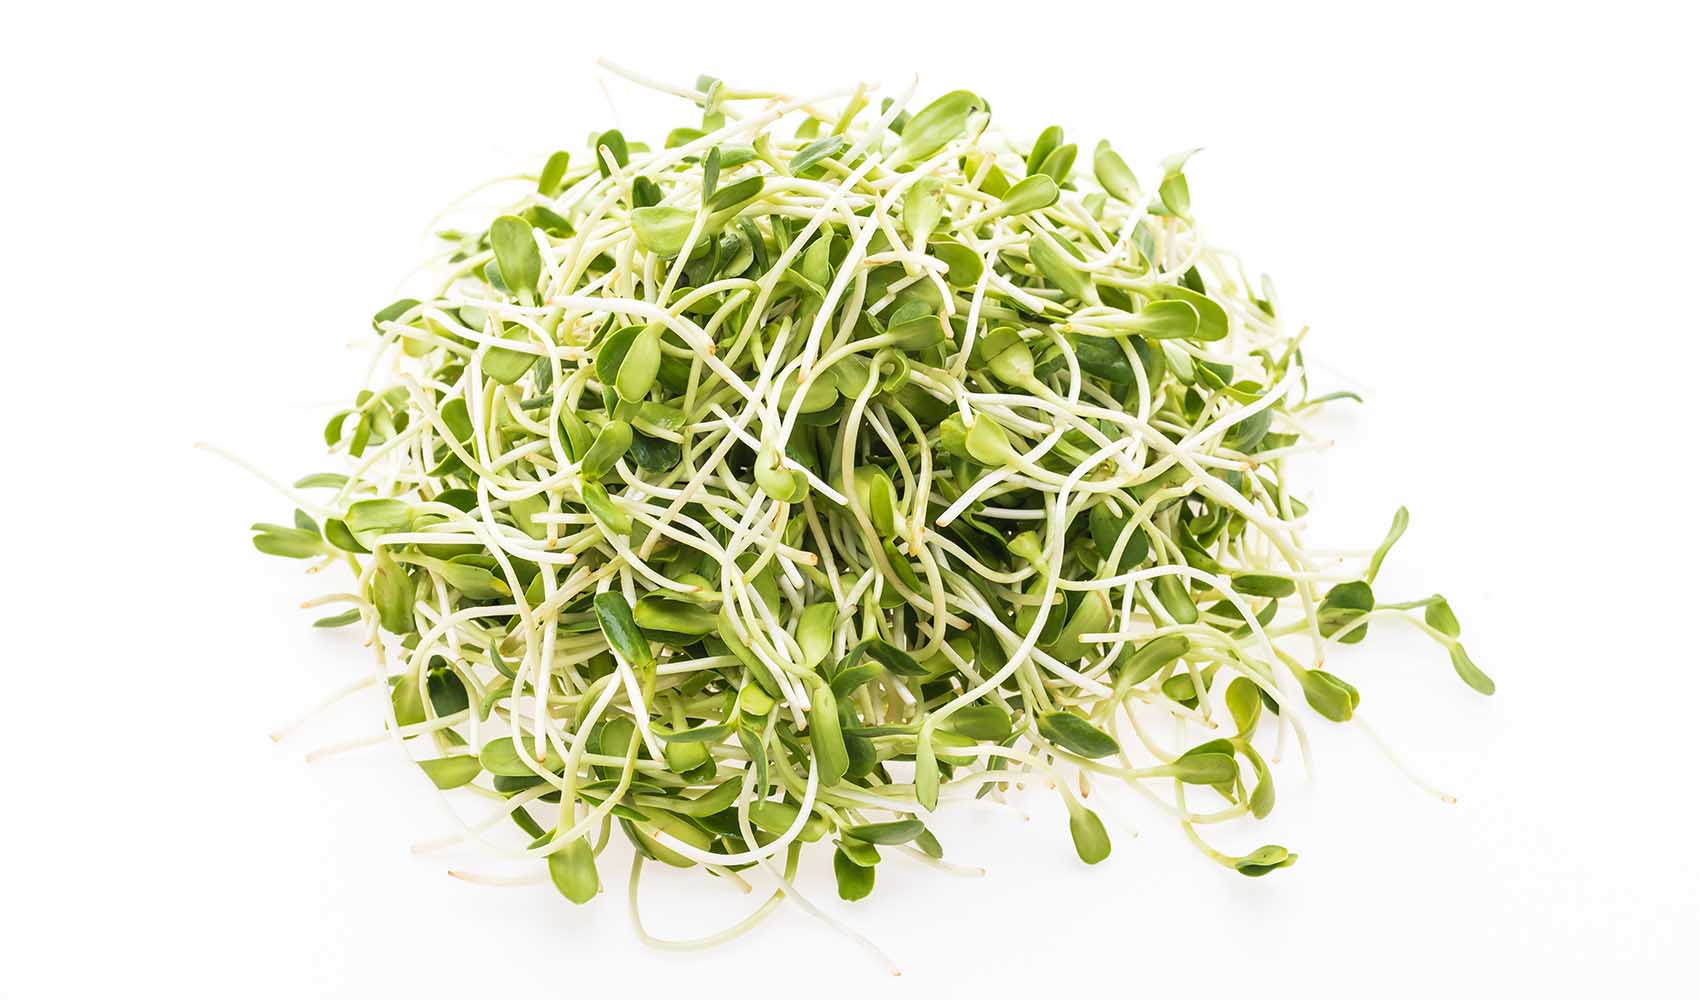 Eating-Sprouts-Wonderful-Benefits-for-Your-Hair-Skin-and-Overall-Health-2